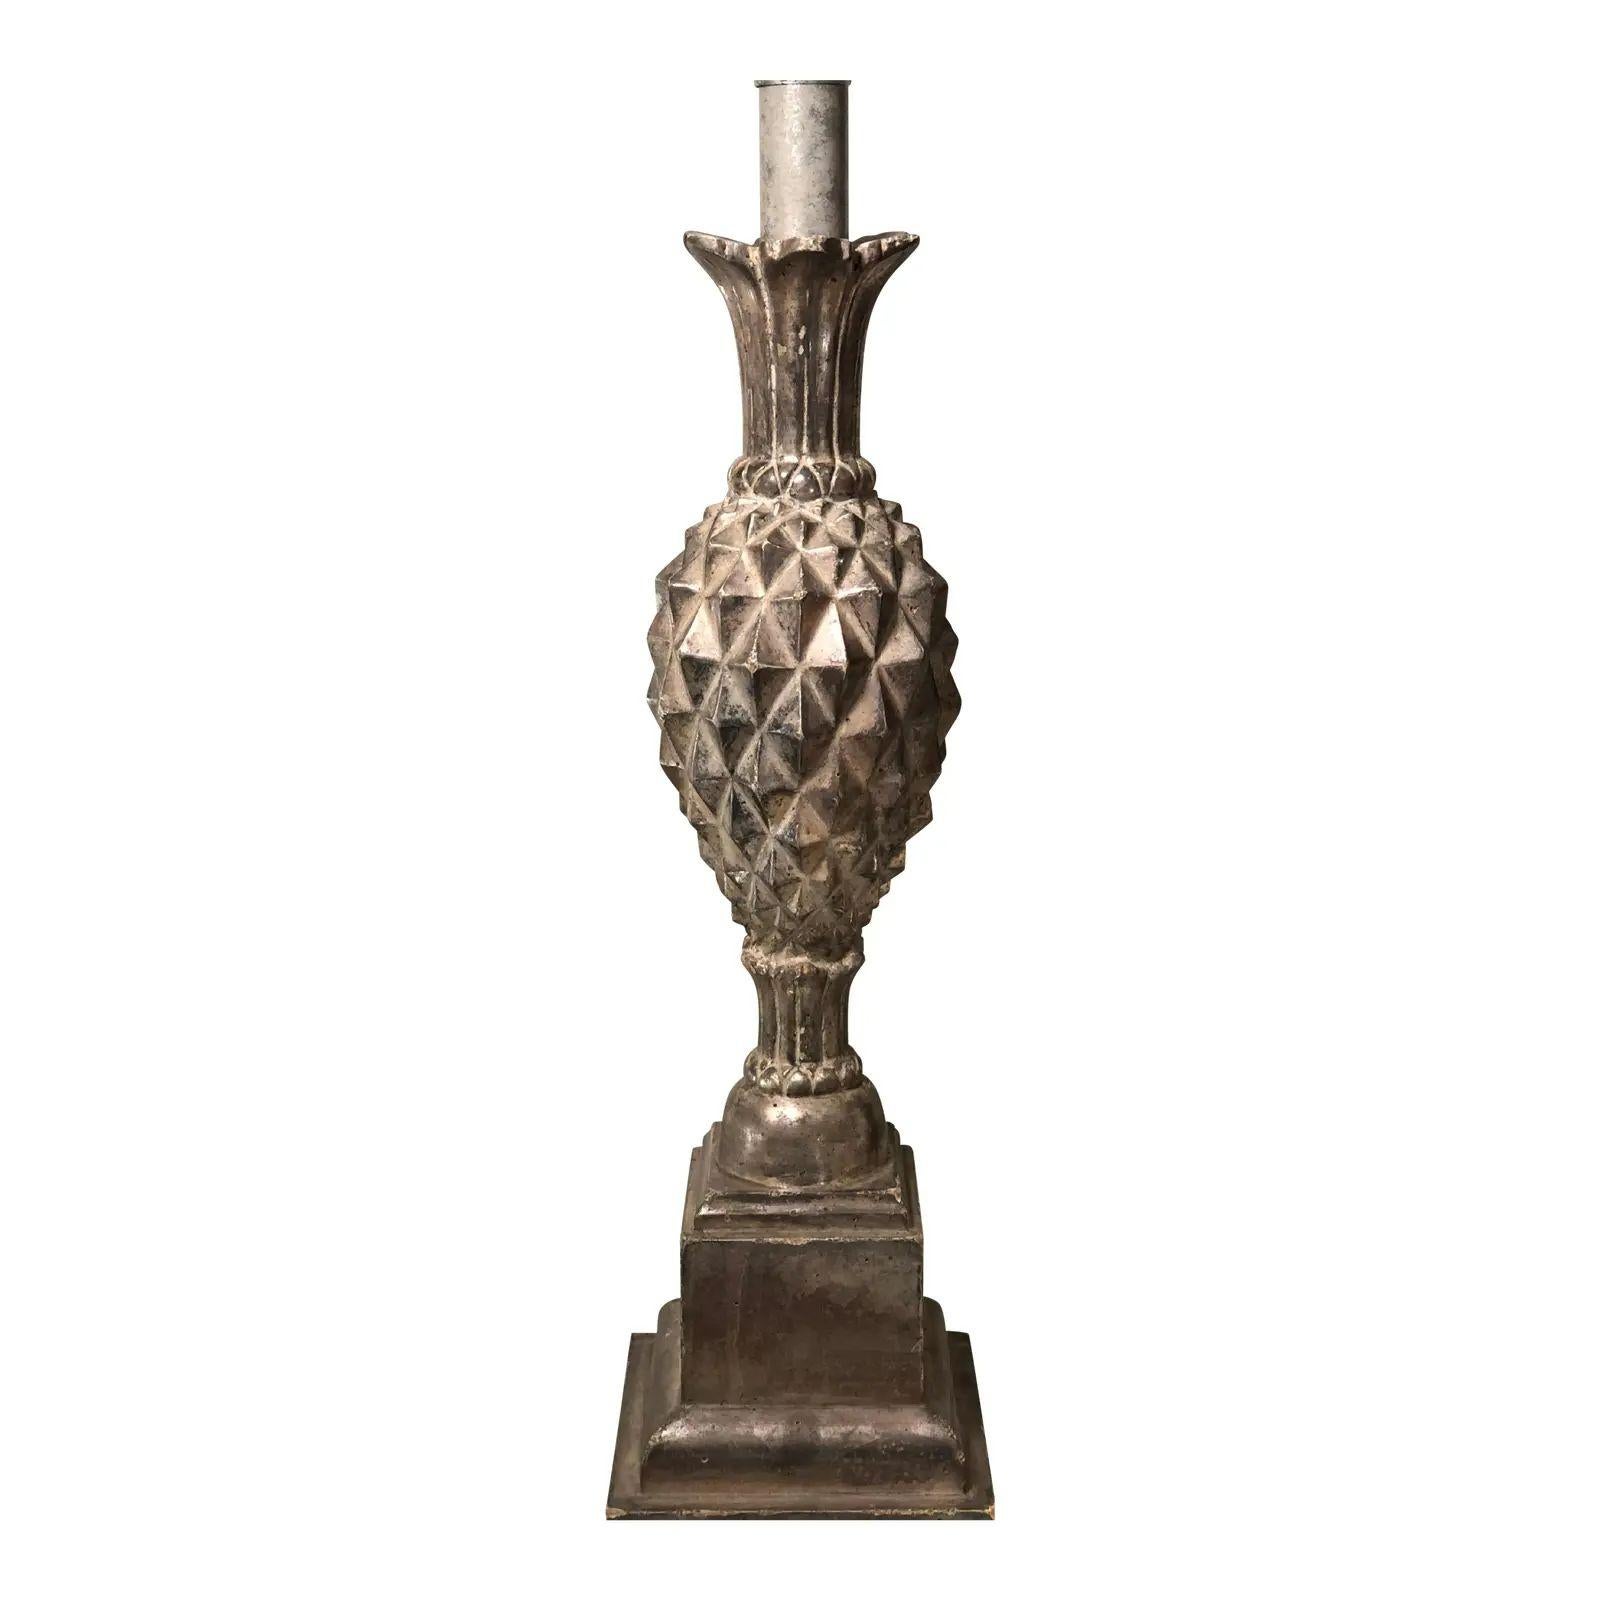 Thomas Morgan White Gold Giltwood Pineapple Lamp

Additional information: 
Materials: Giltwood, Gold
Color: Silver
Place of Origin: North America
Period: 2000 - 2009
Styles: Italian, Neoclassical, Regency
Lamp Shade: Not Included
Power Sources: Up